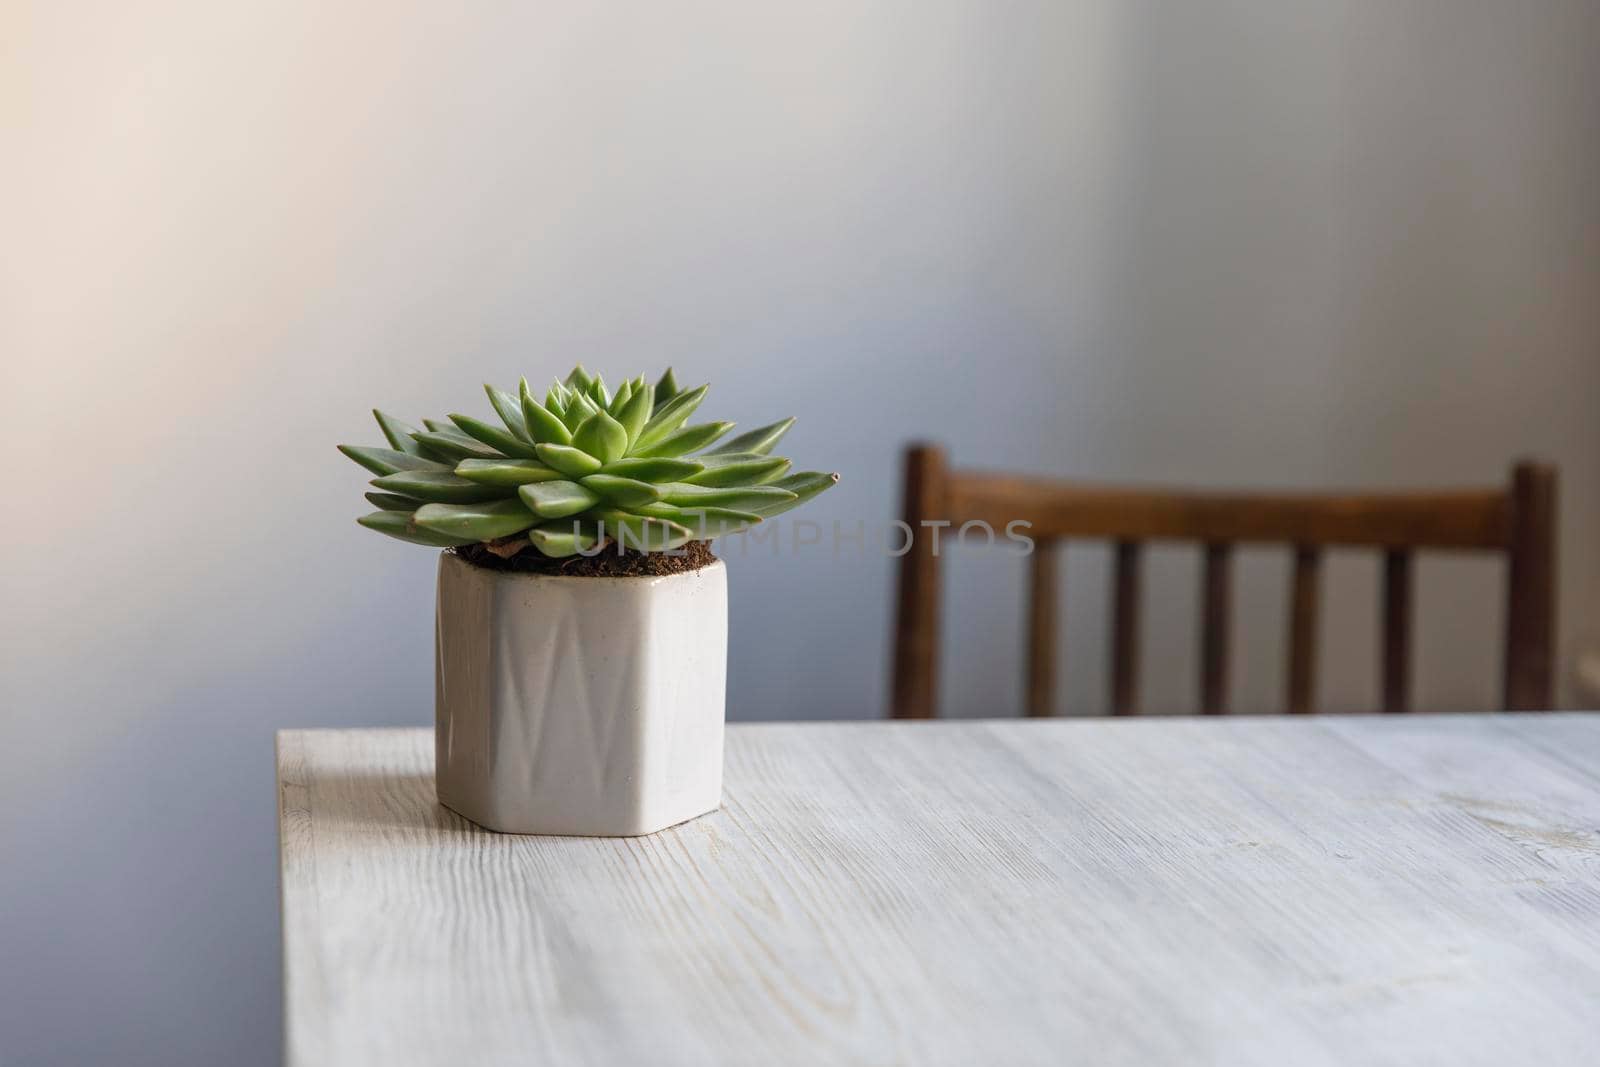 Echeveria in a beautiful ceramic pot on a beige table in the kitchen as an interior decoration .Place for text. Copy space